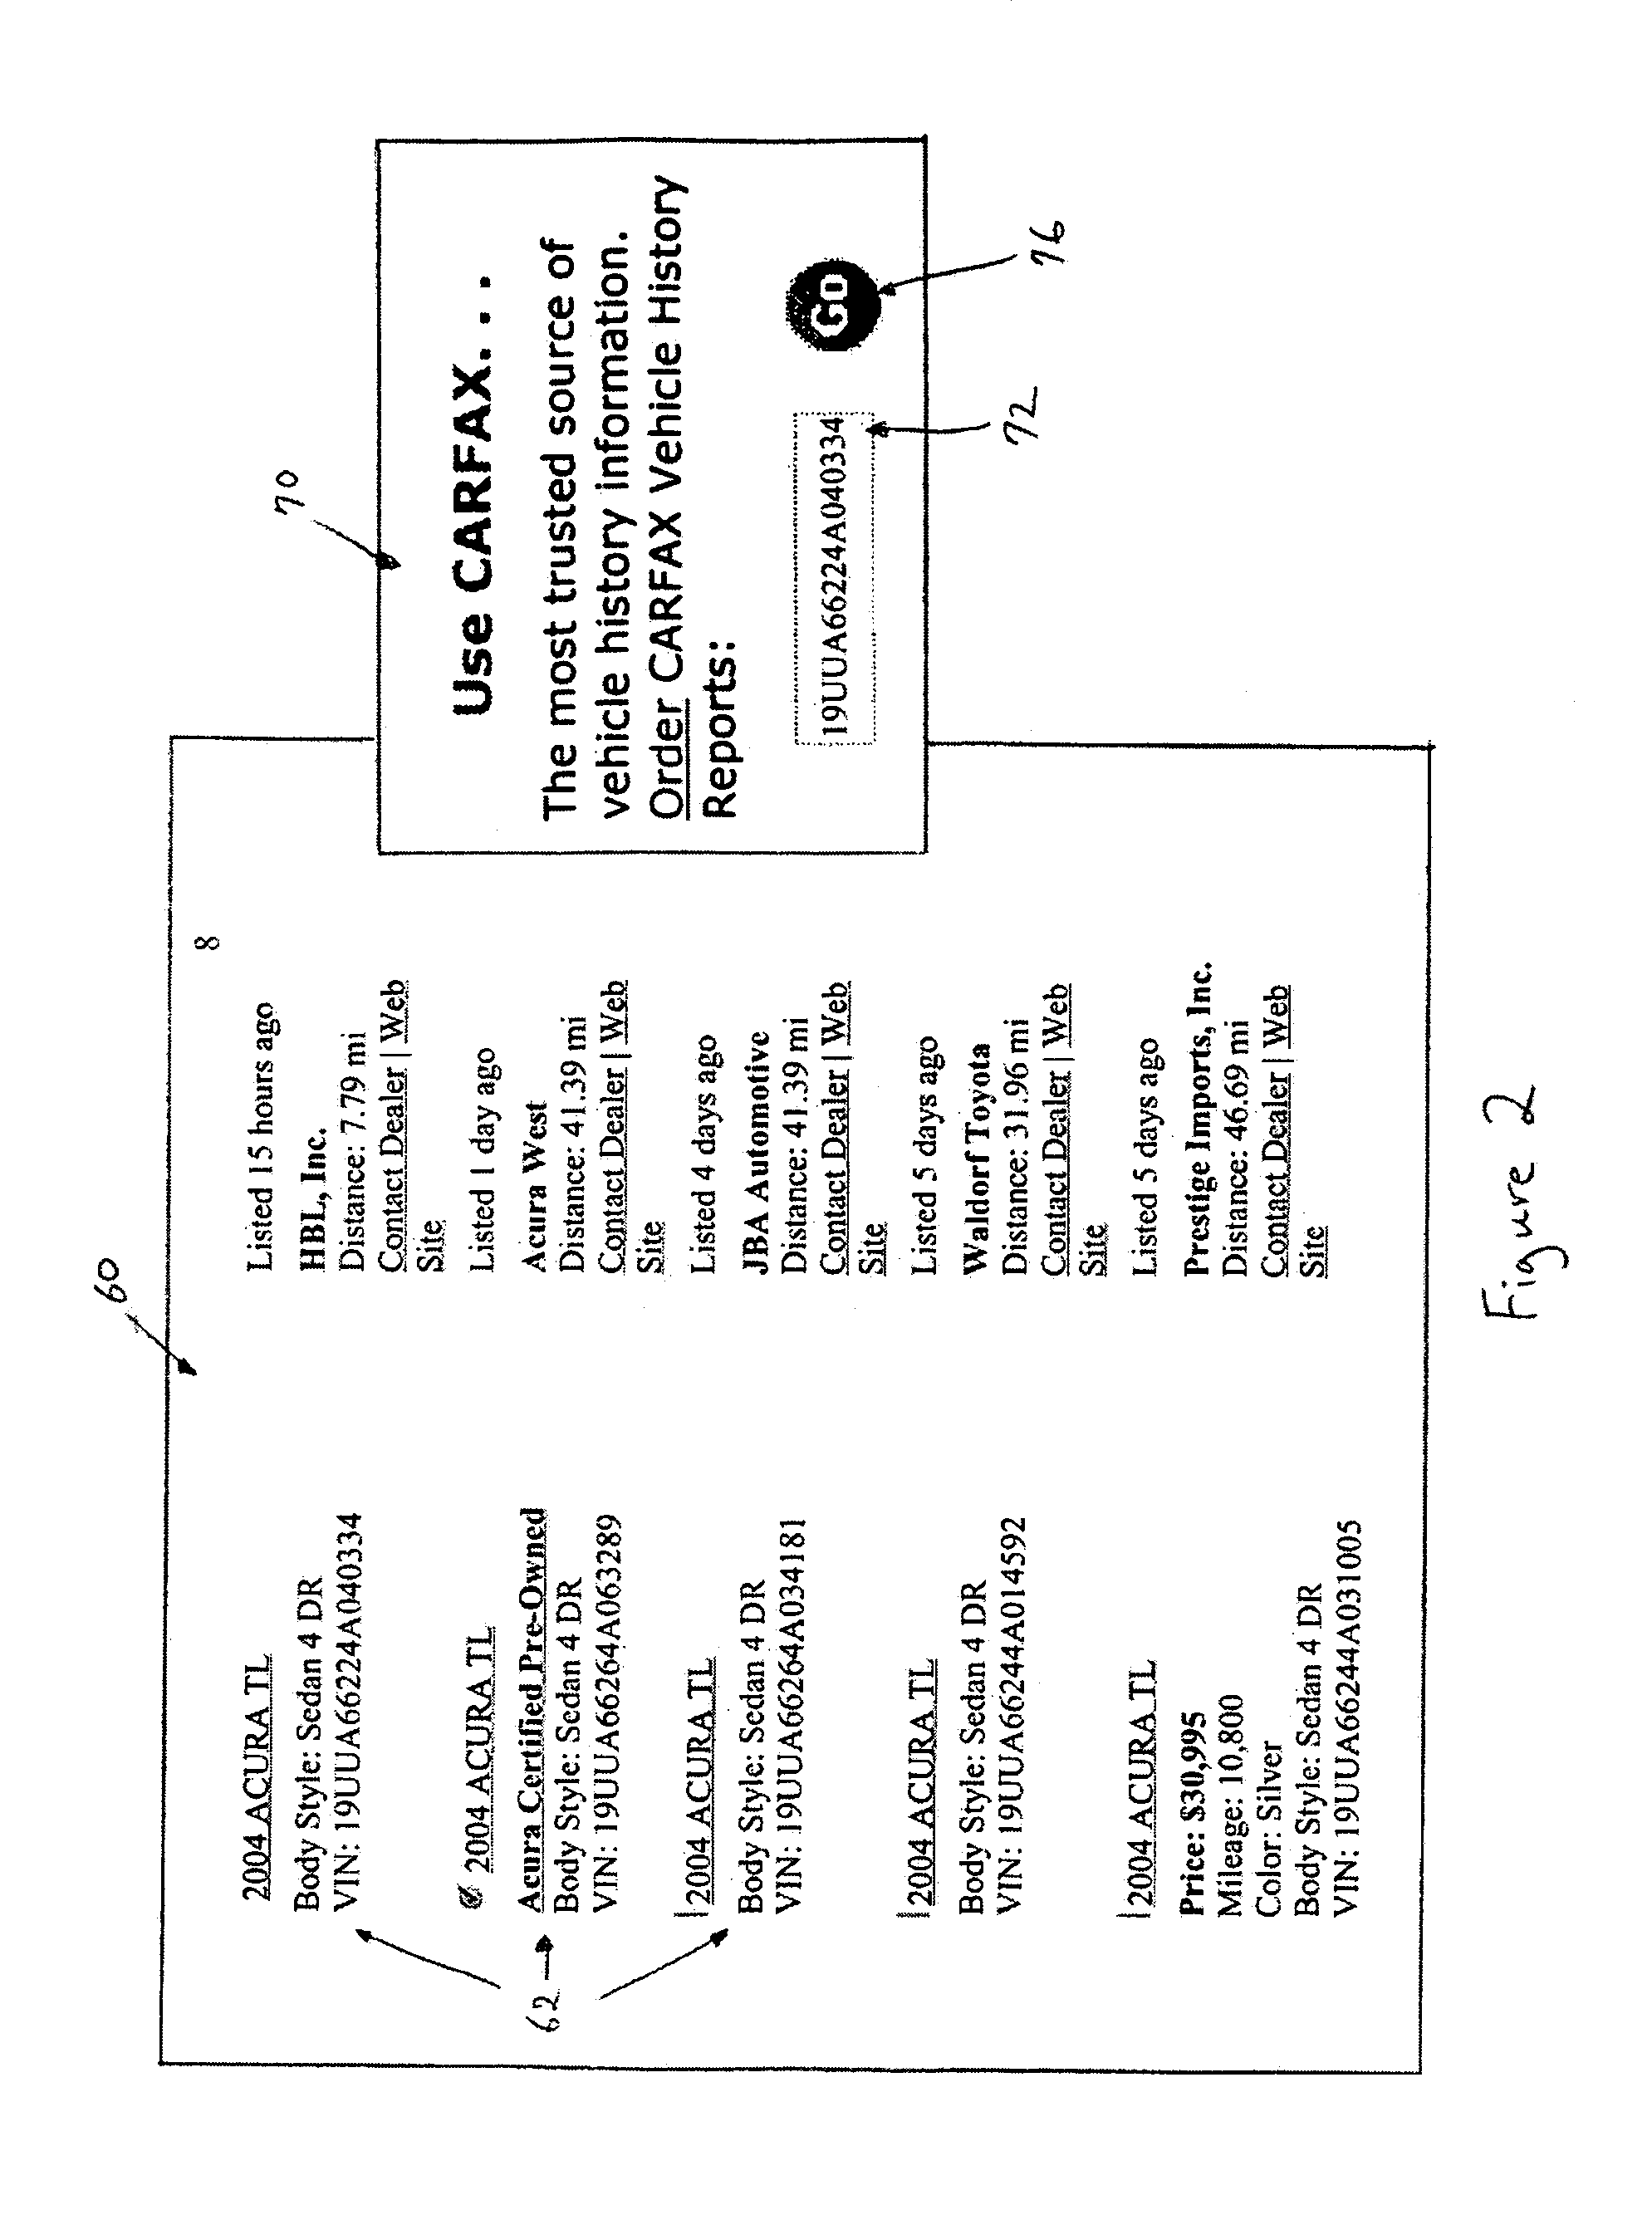 System and method for automatic identification of vehicle identification number